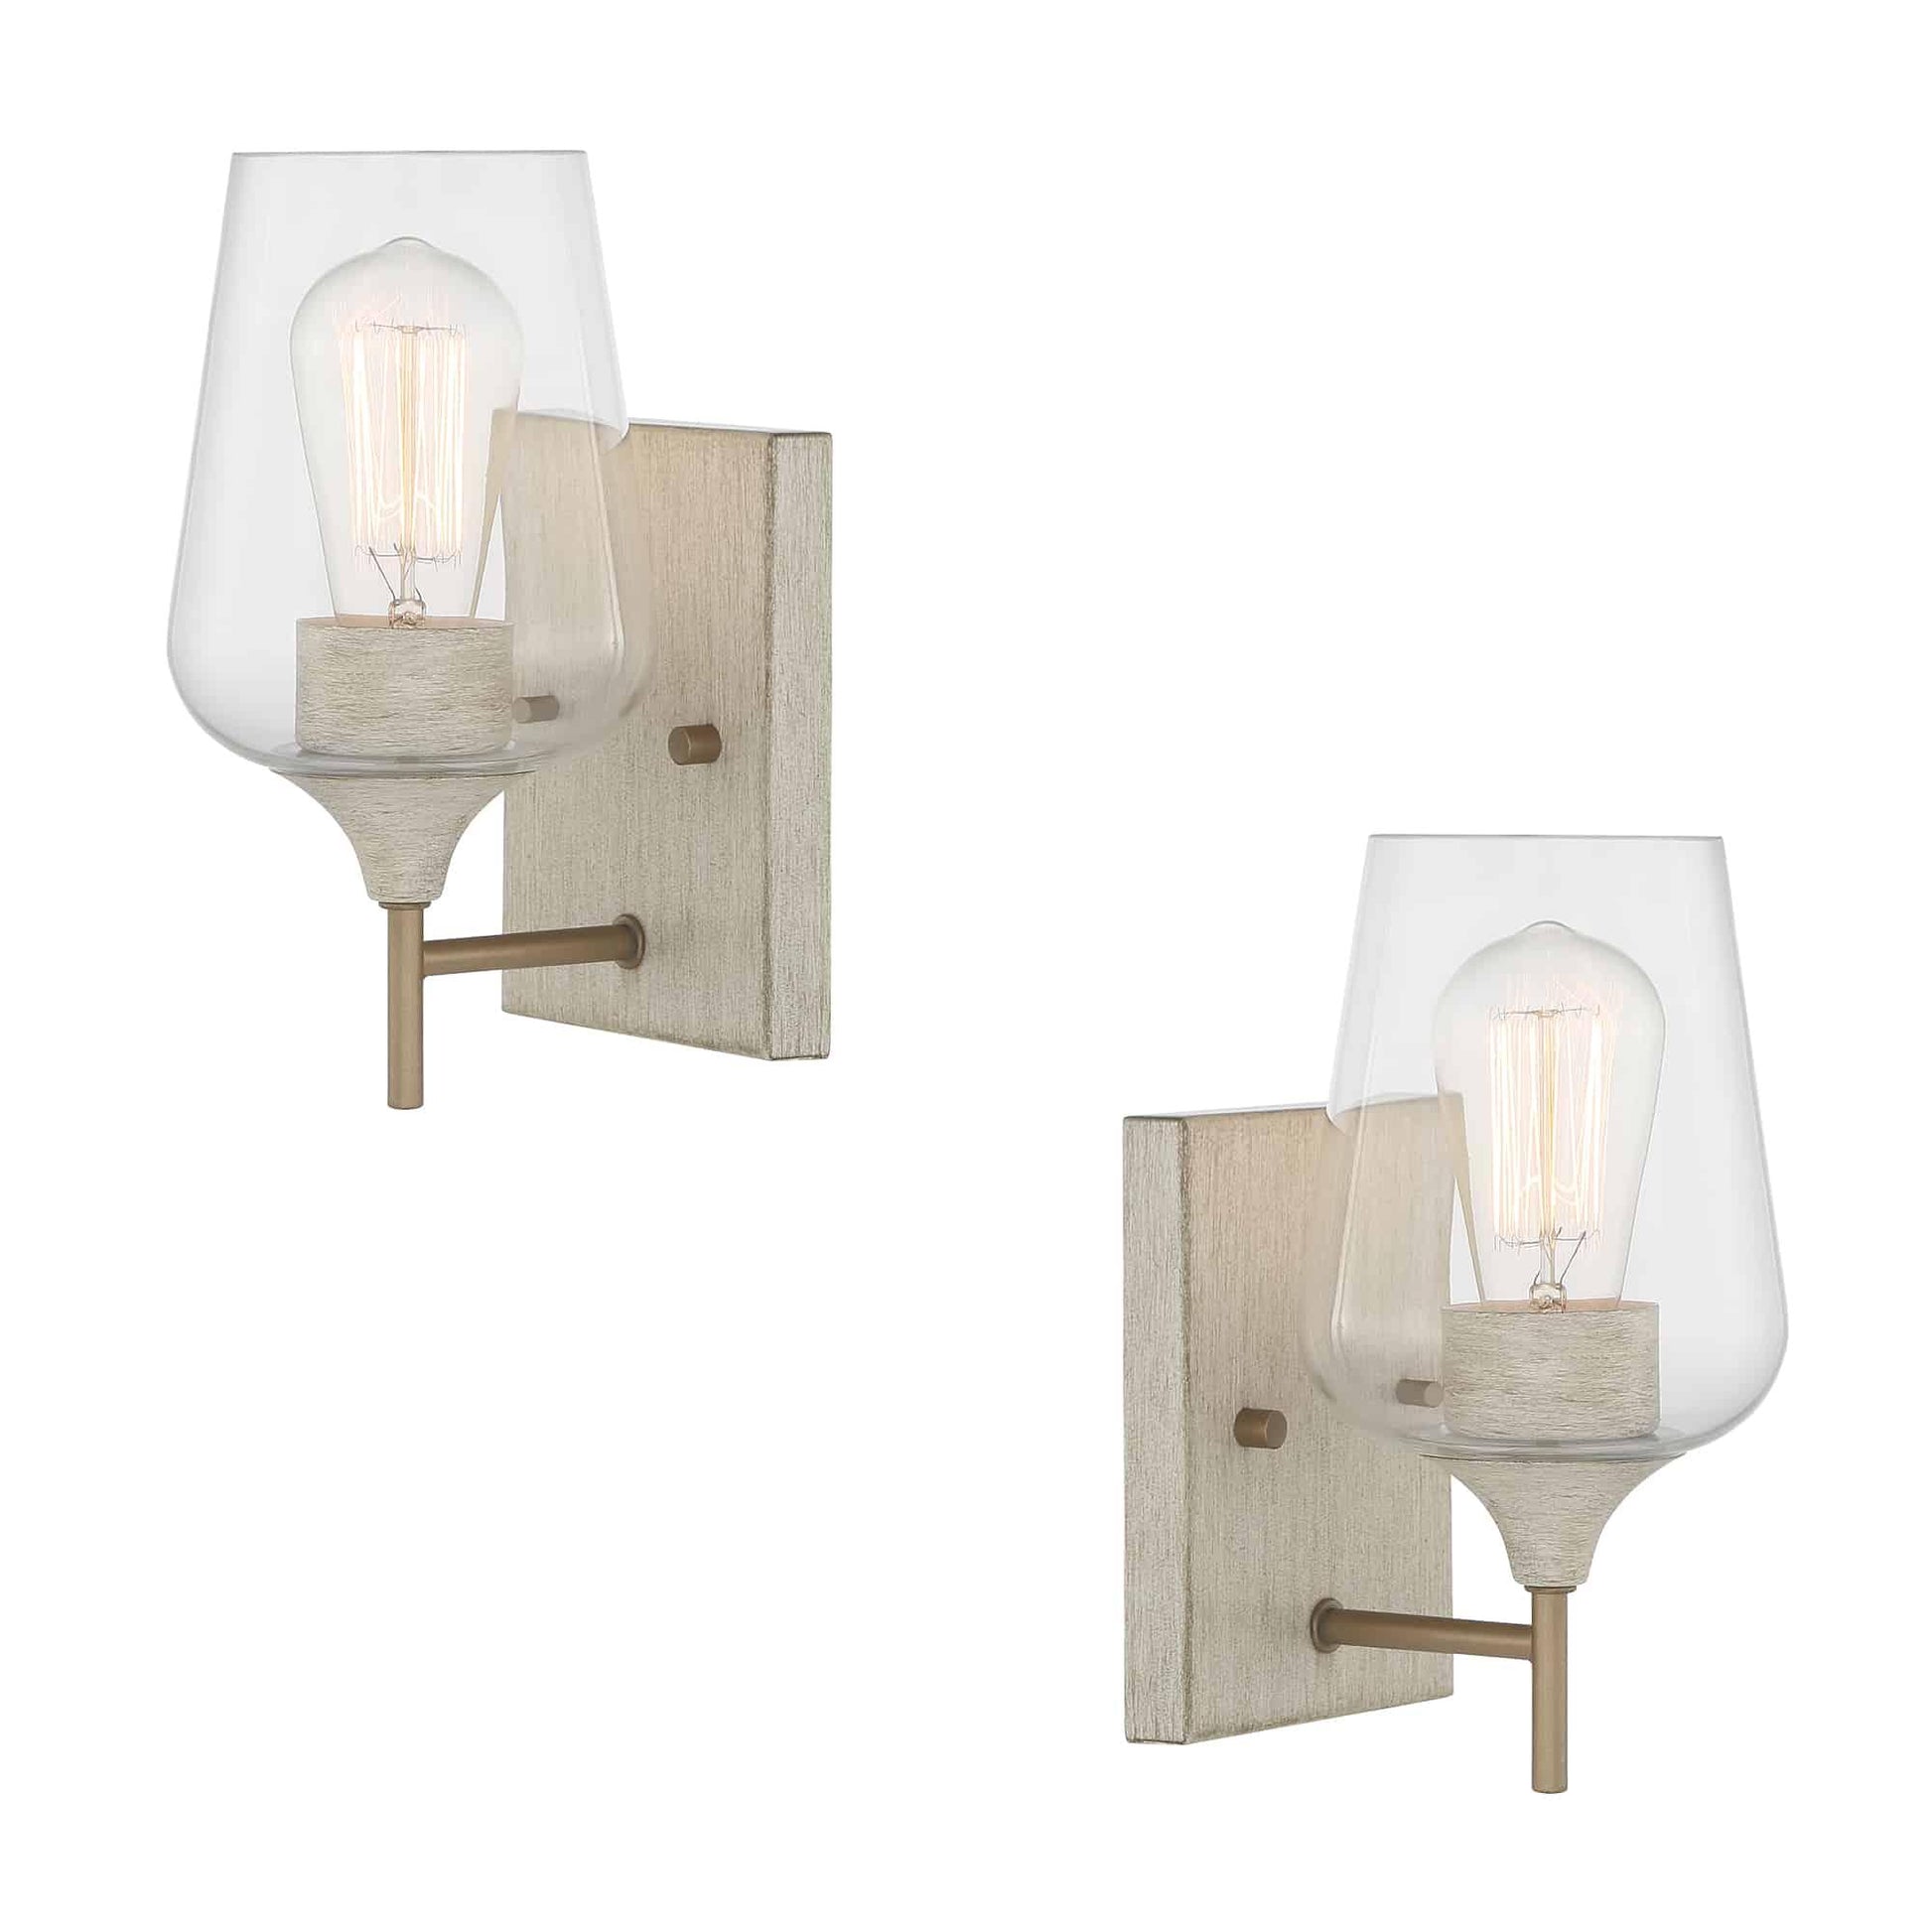 1 light glass wall sconce set of 2 (47) by ACROMA